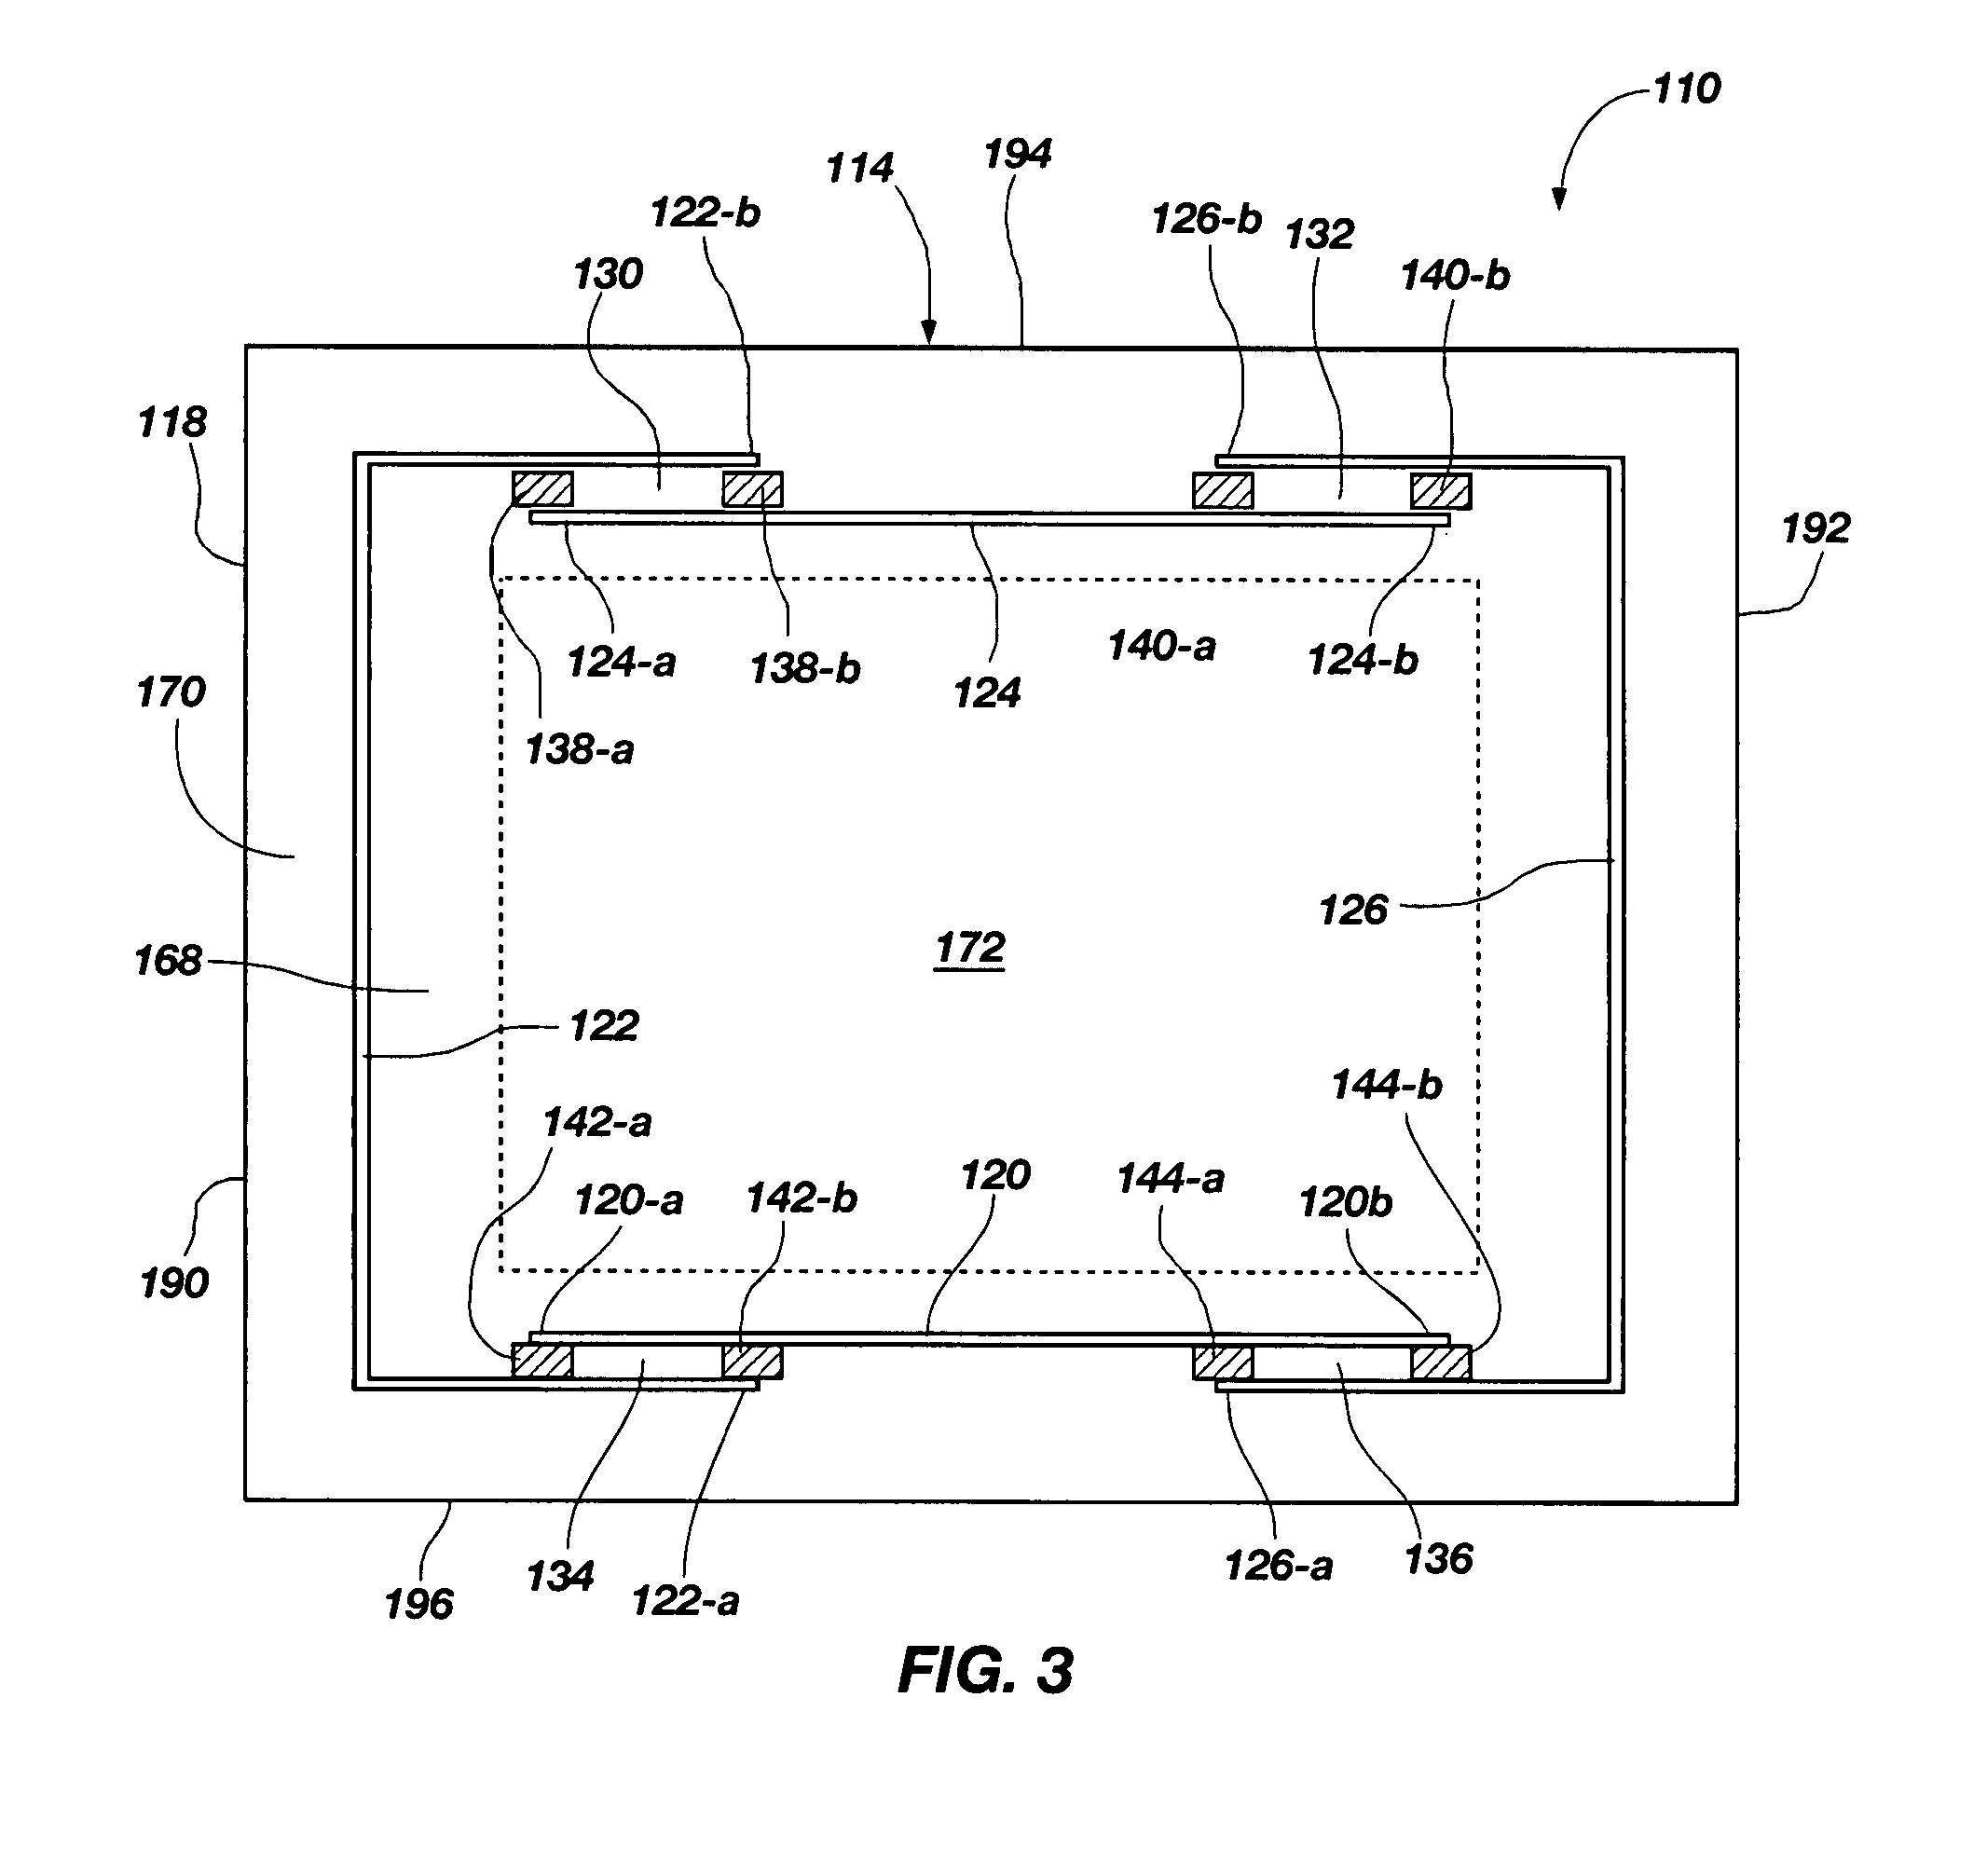 Force-based input device having an elevated contacting surface